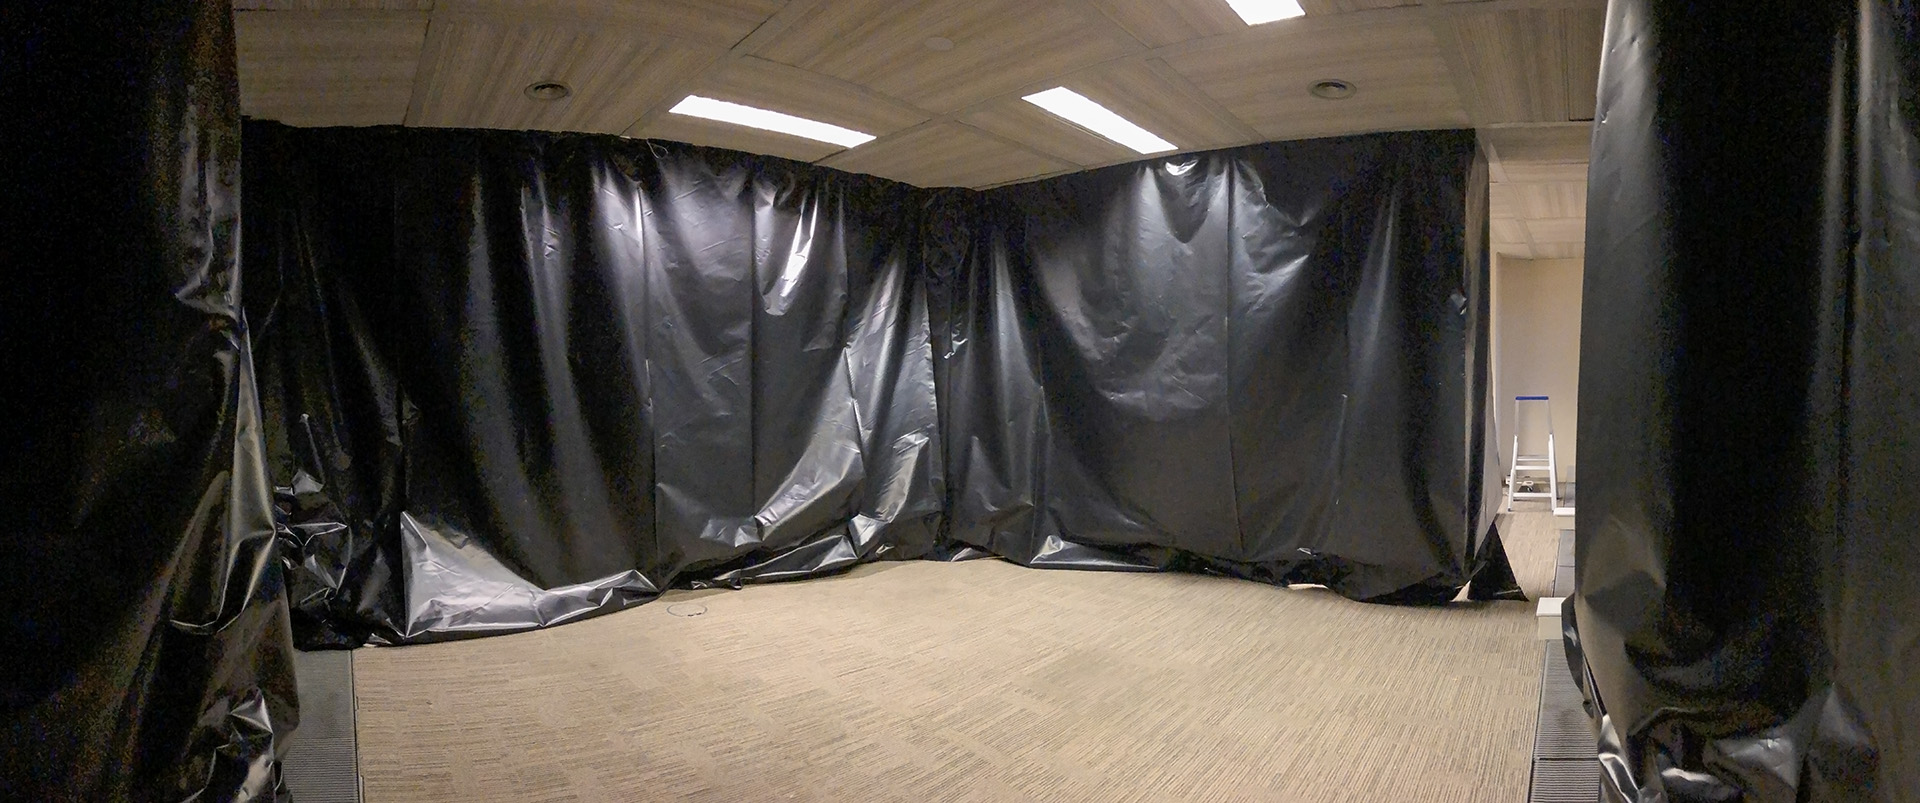 Wide angle view from inside of the camera obscura during construction. The walls of the camera are made of thick, black plastic hanging off the ceiling forming an almost completely closed off area.